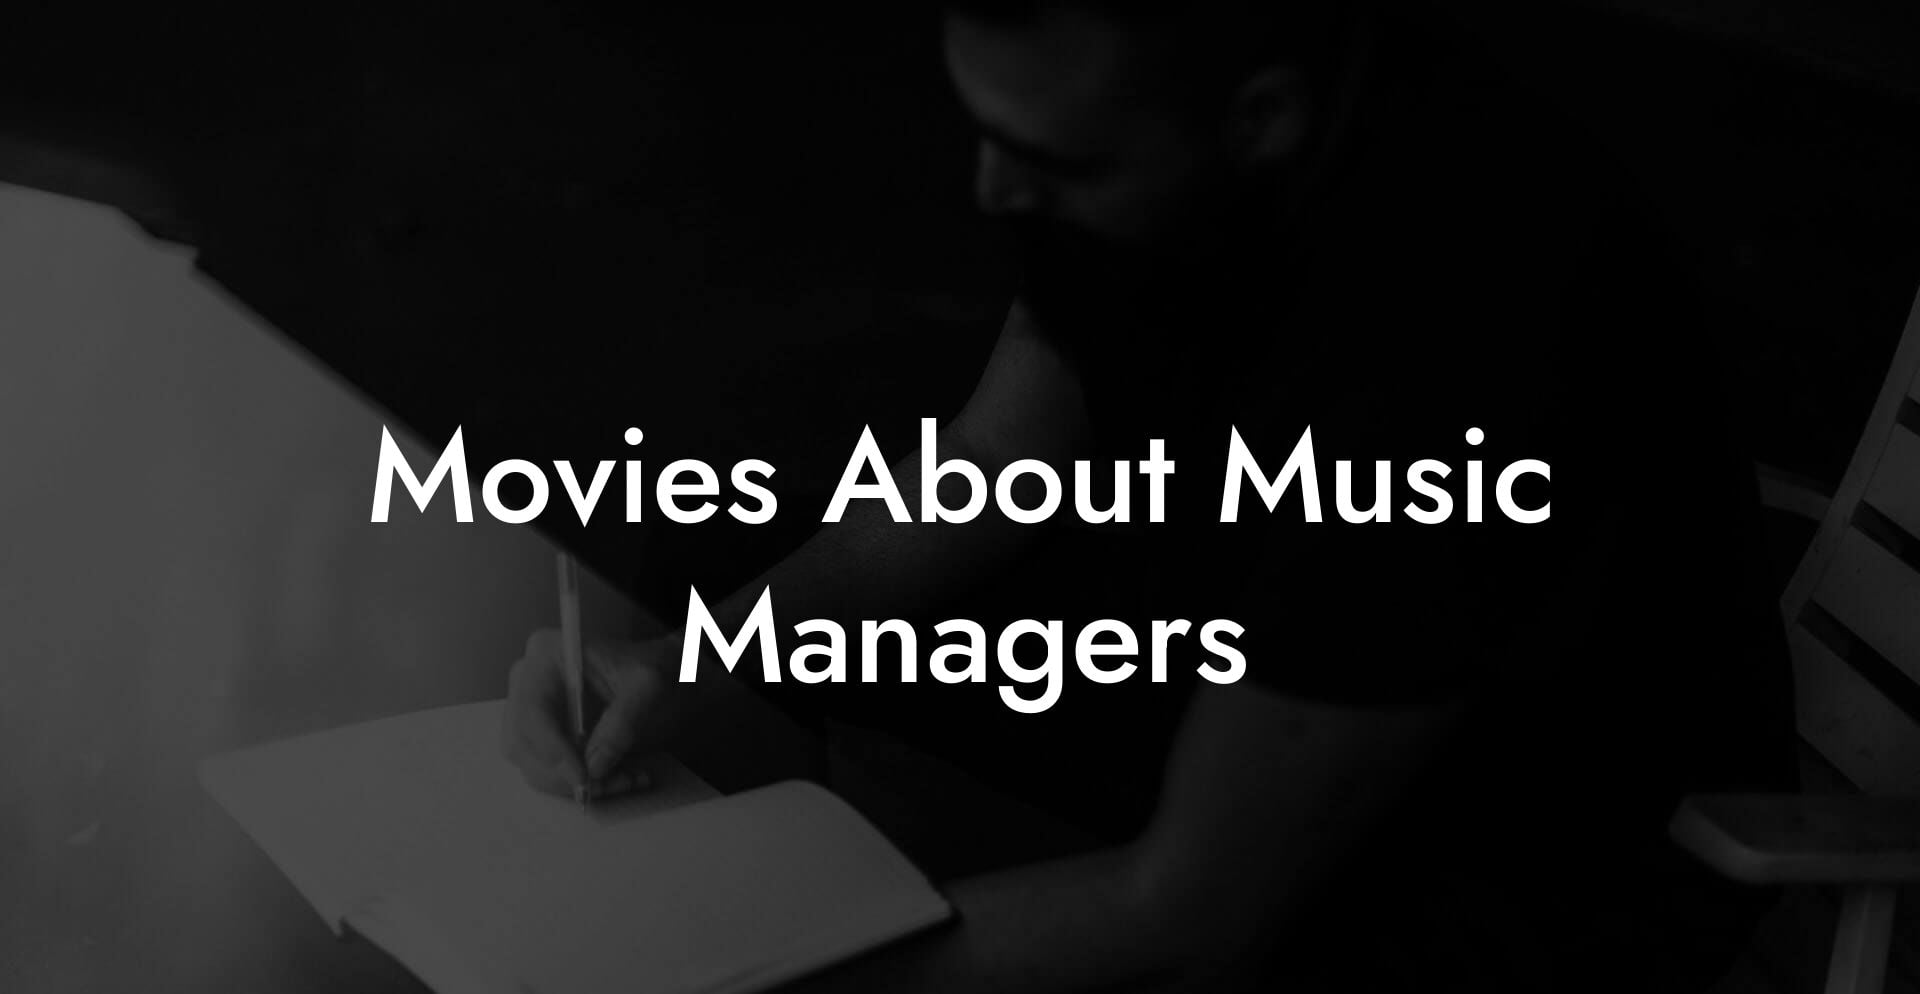 Movies About Music Managers